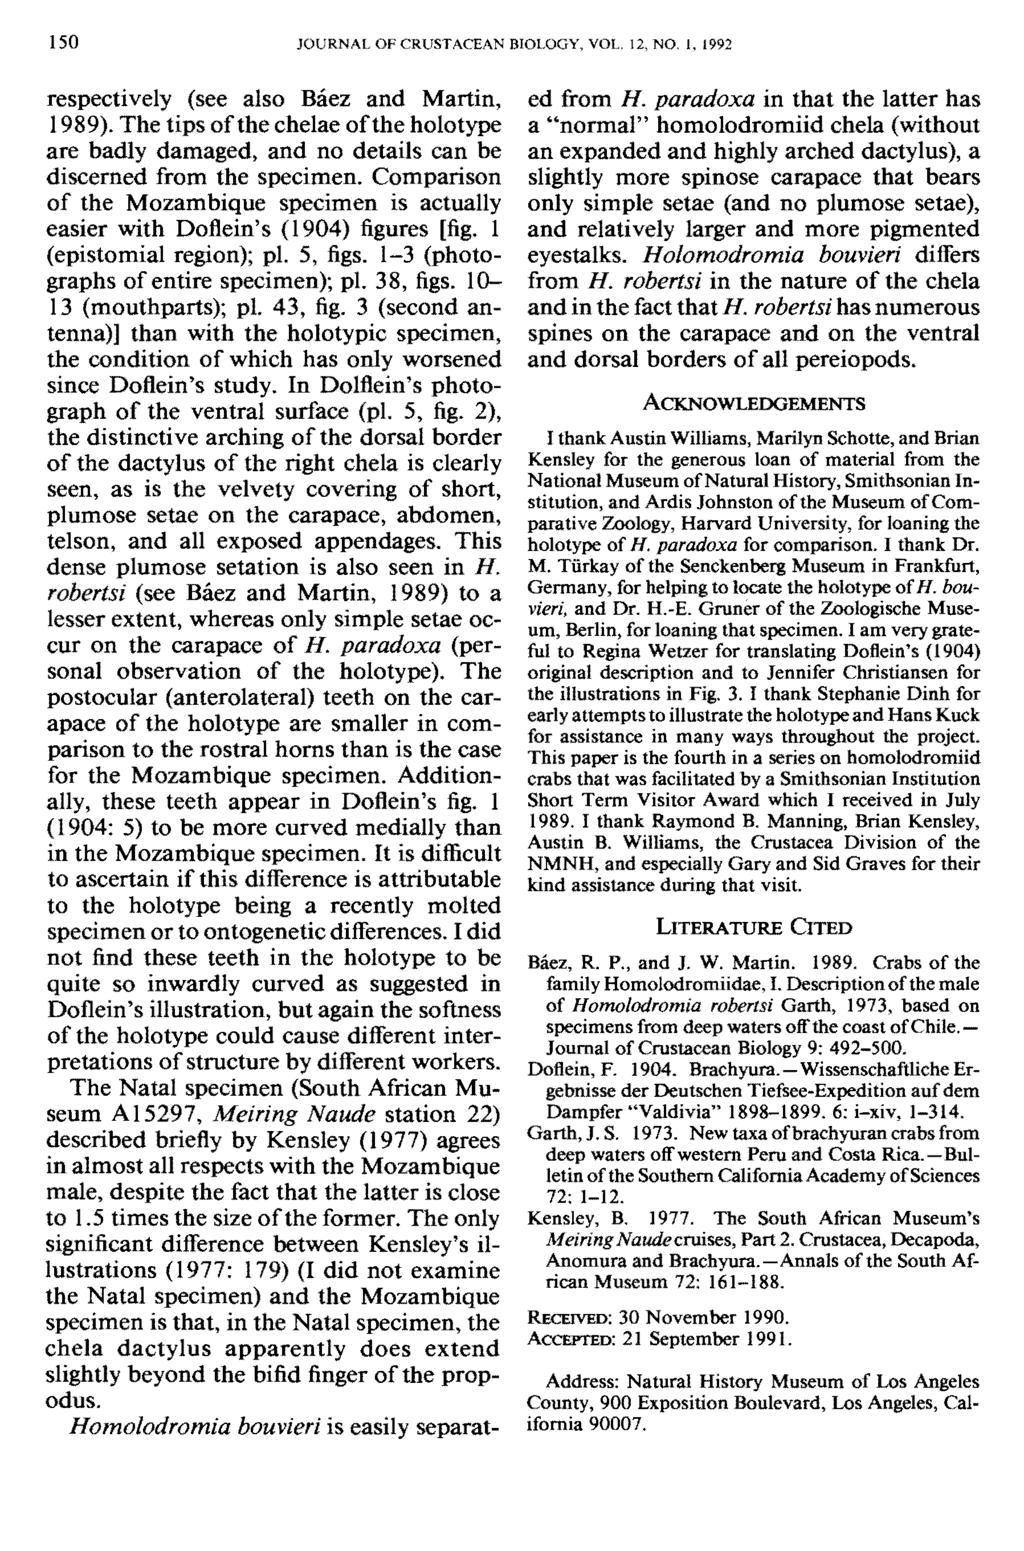 150 JOURNAL OF CRUSTACEAN BIOLOGY, VOL. 12, NO. 1, 1992 respectively (see also Baez and Martin, 1989).